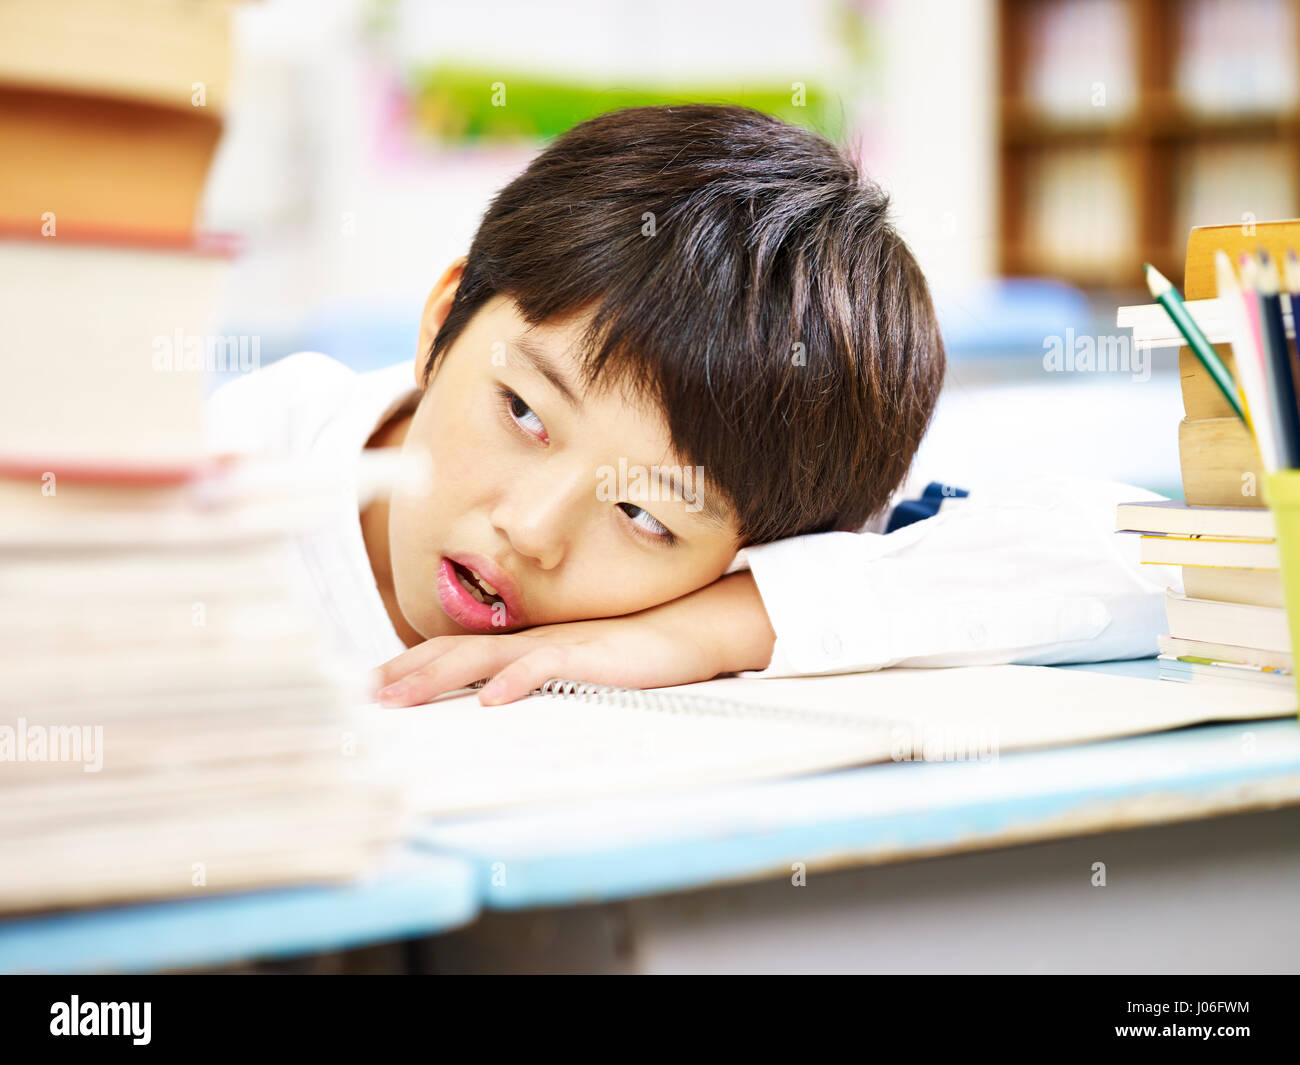 asian elementary schoolboy tire and resting head on desk. Stock Photo